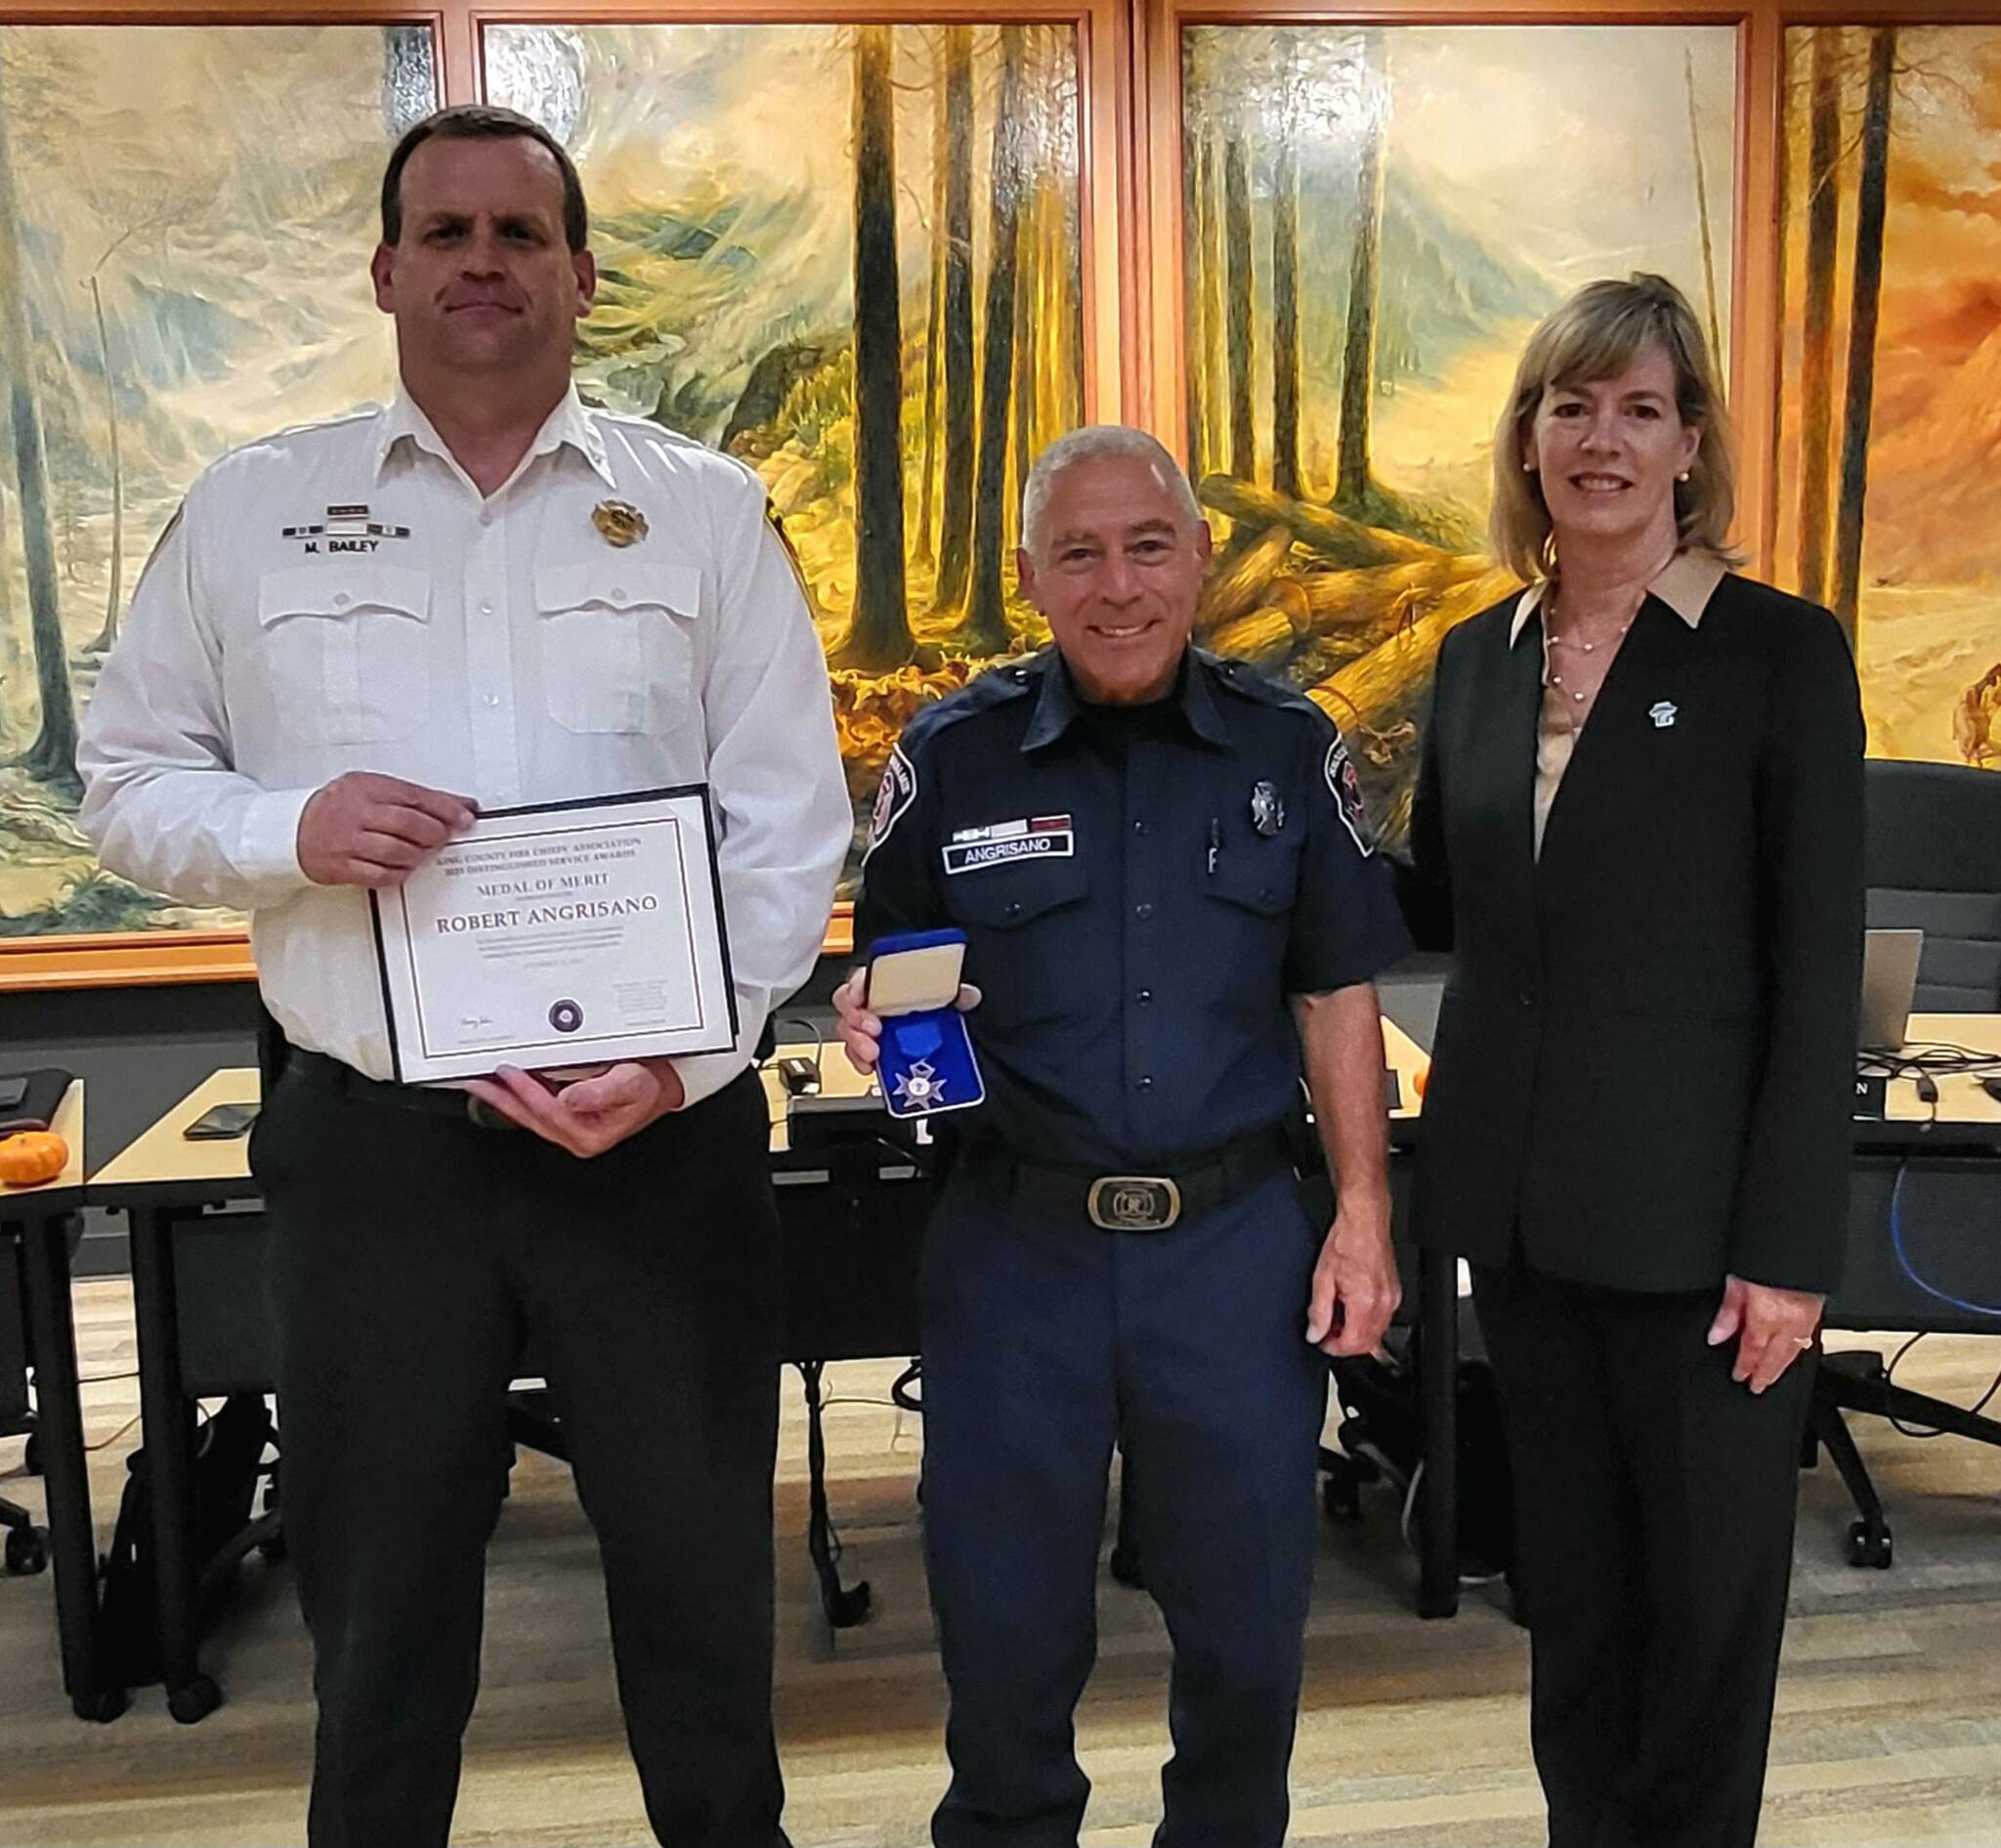 Courtesy Photo. Volunteer Firefighter Robert Angrisano, center, is honored at a city council meeting alongside Mayor Katherine Ross and Interim Fire Chief Mike Bailey.